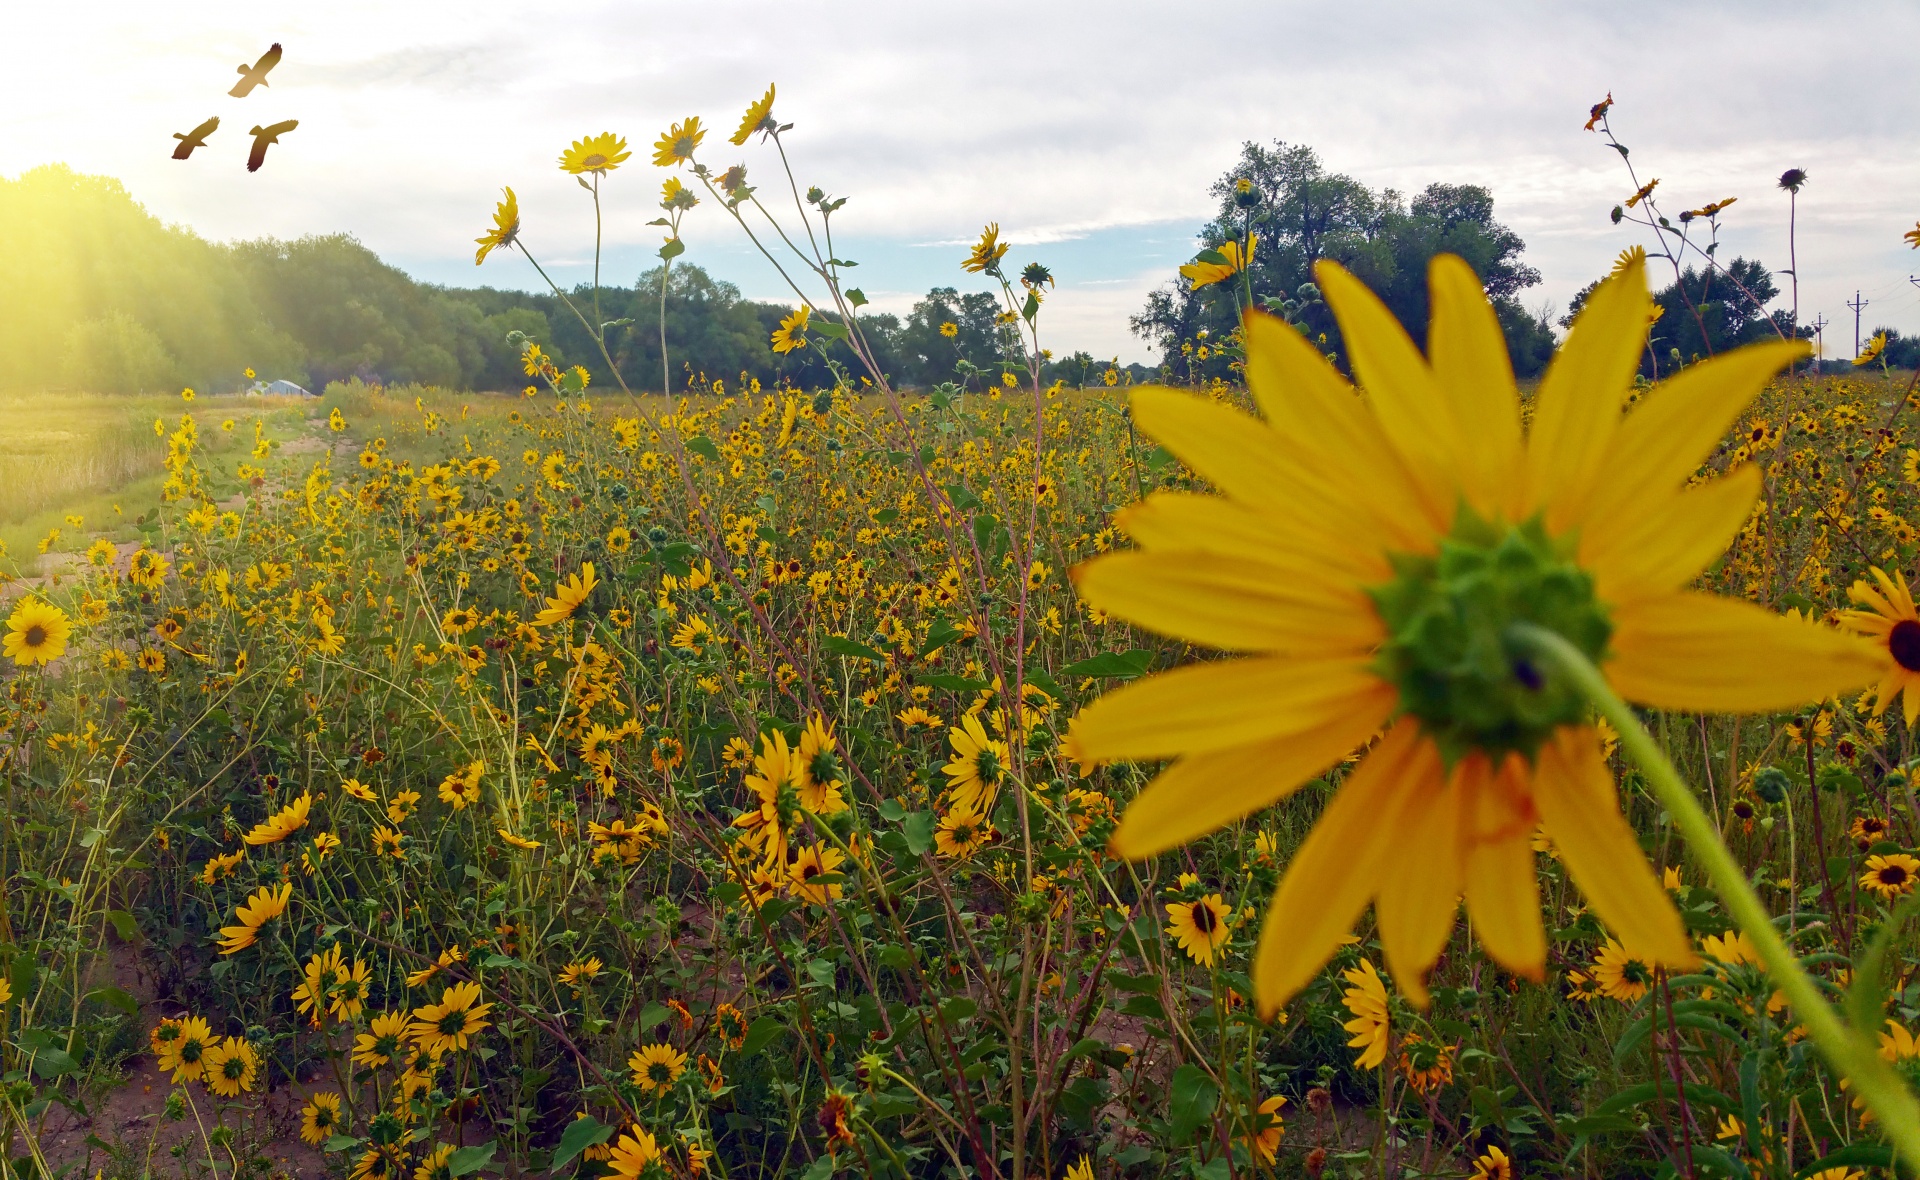 Abandoned historic ranch now covered in wild sunflowers under the hundred year old oaks